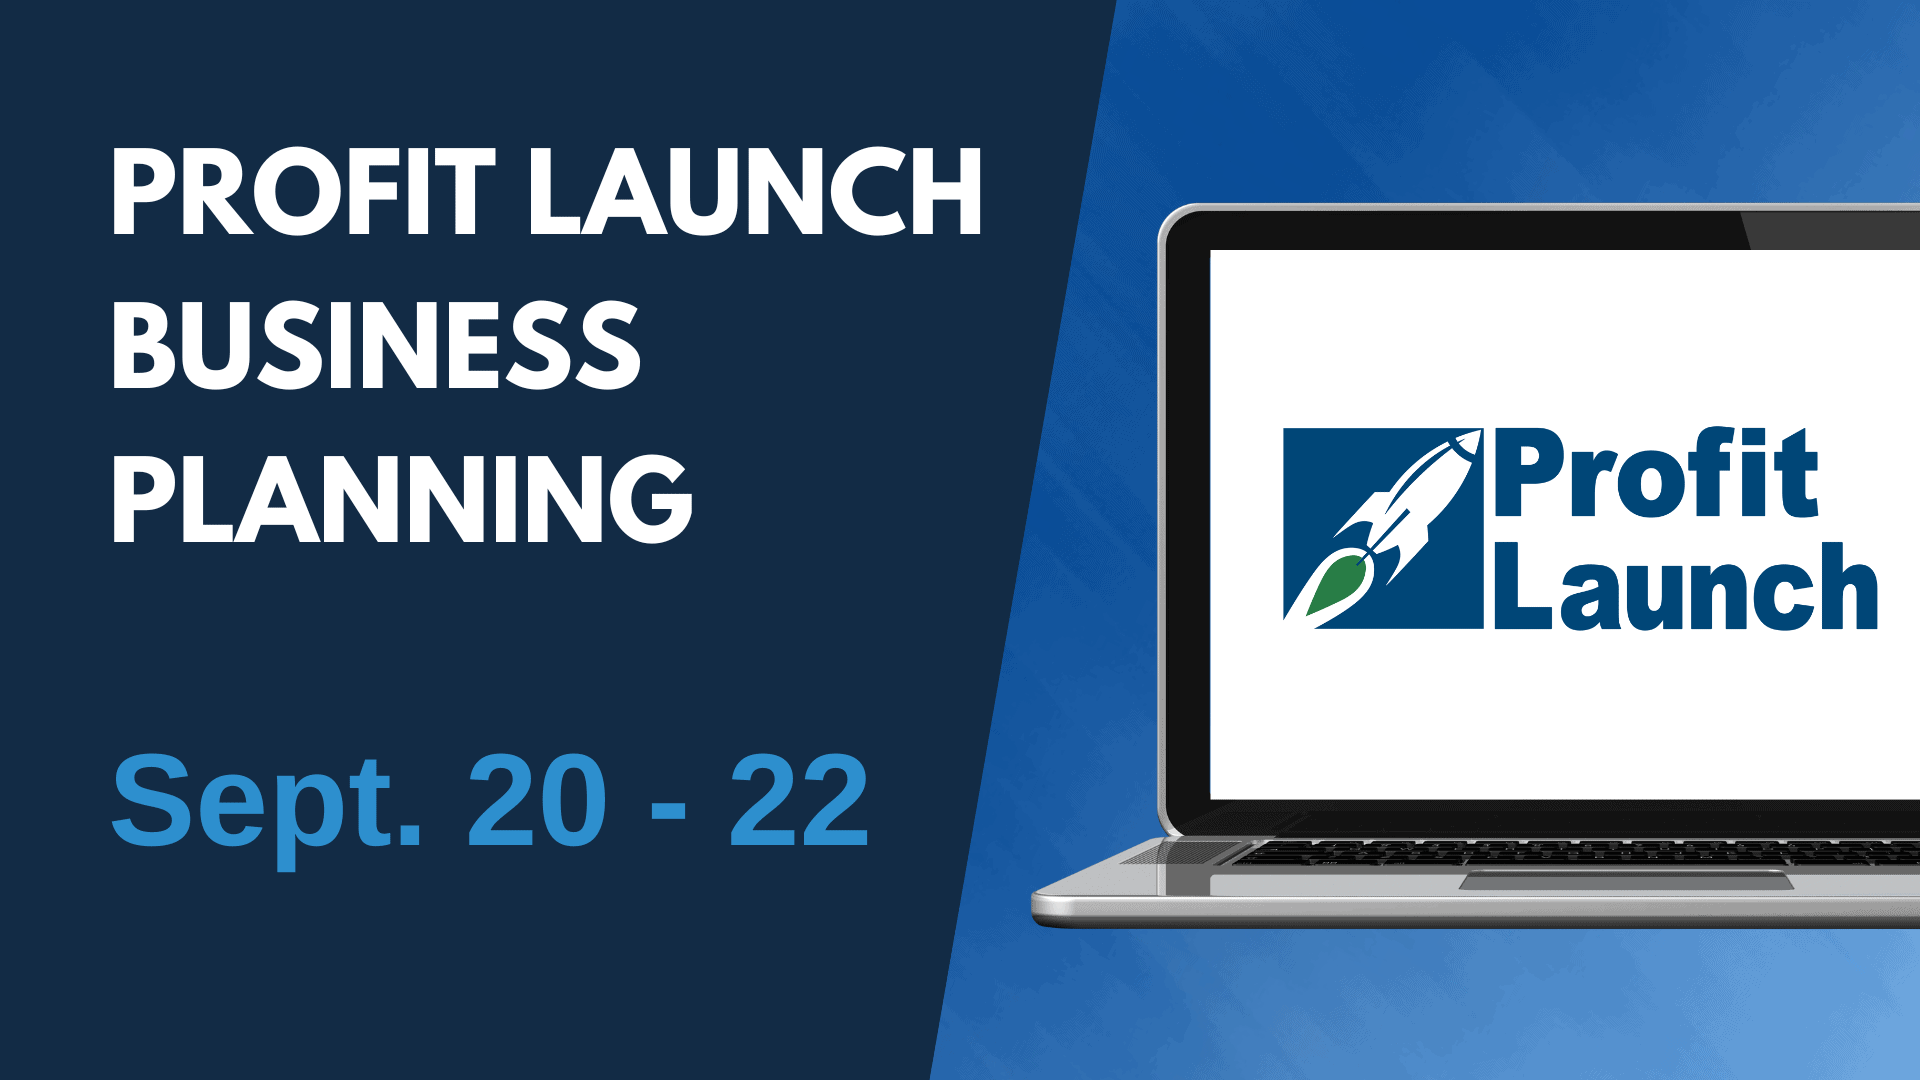 Profit Launch Business Planning - September 20 to 22